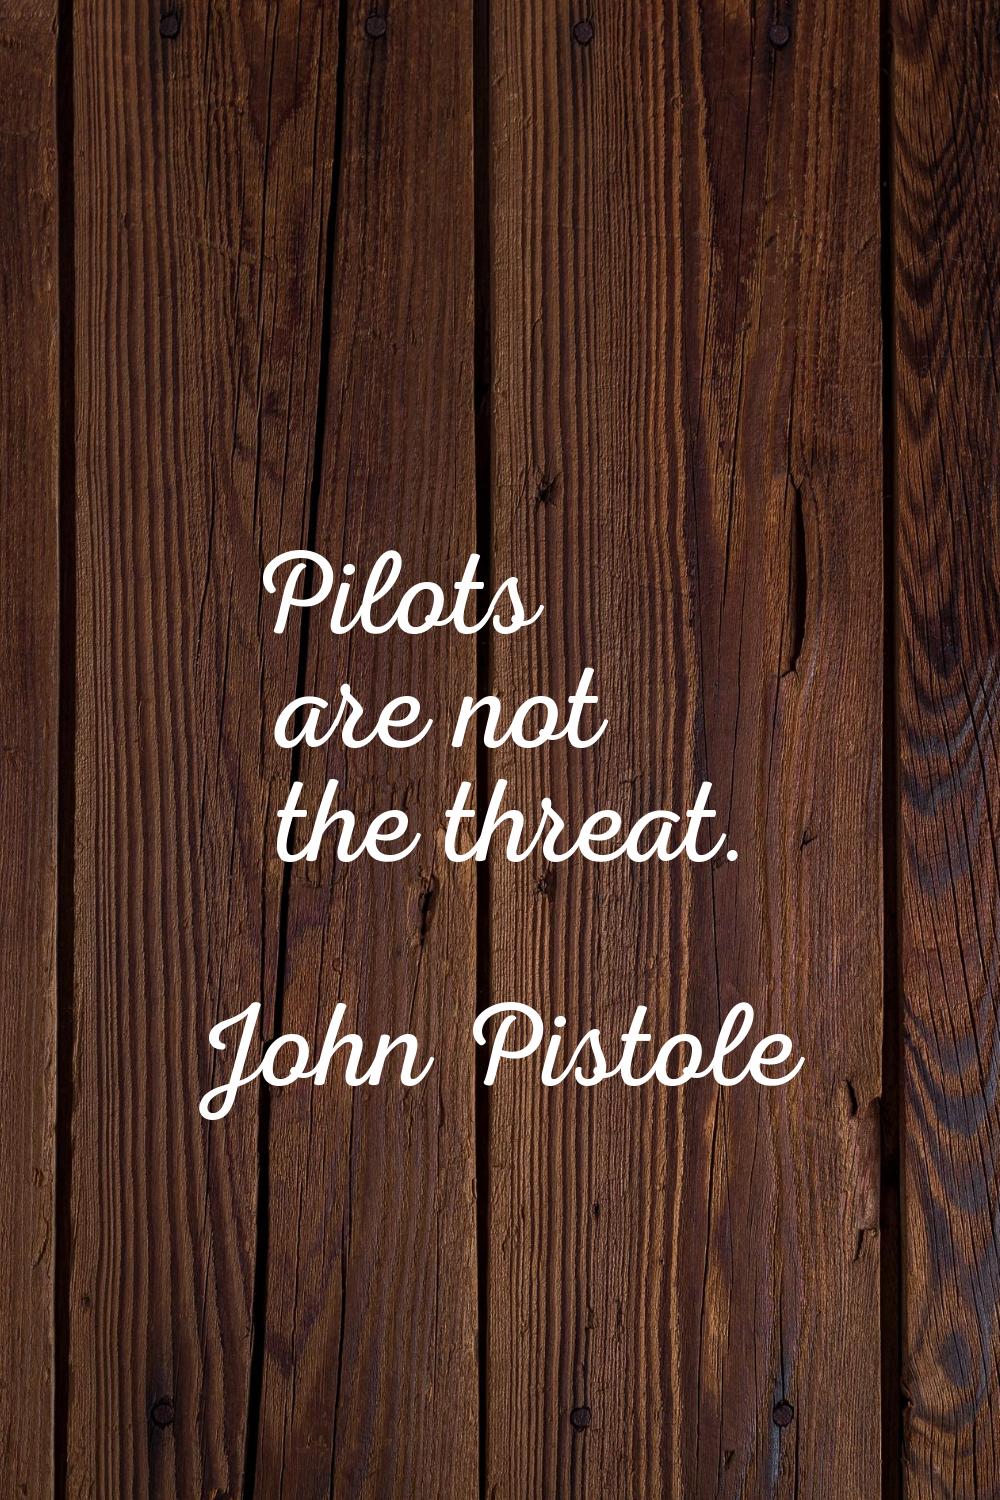 Pilots are not the threat.